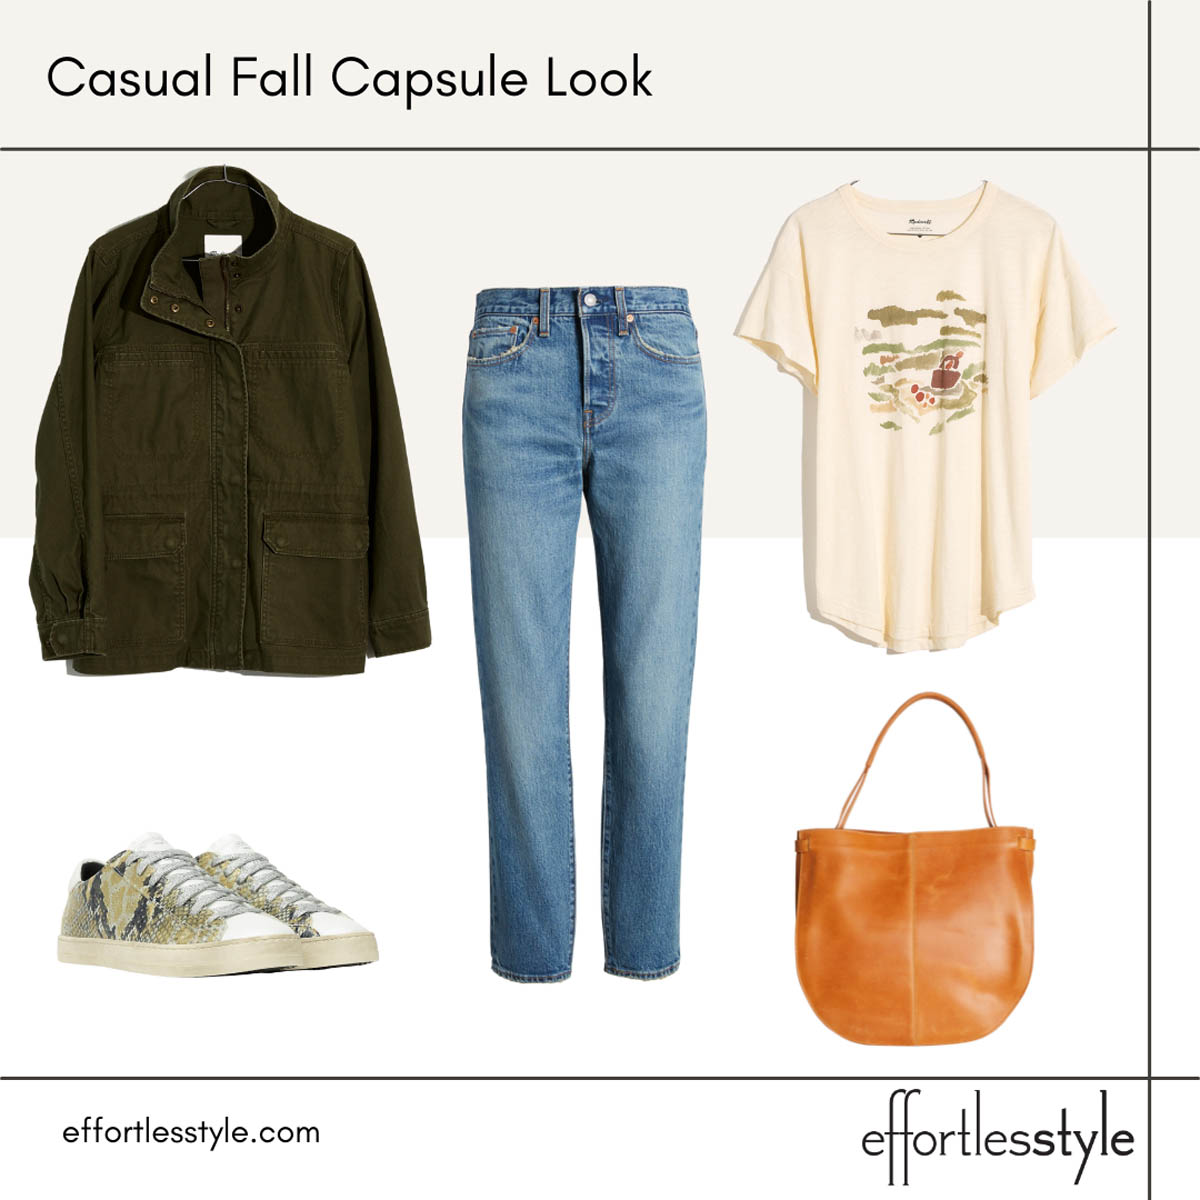 Fall Capsule Wardrobe Looks Utility Jacket and Graphic Tee with Denim